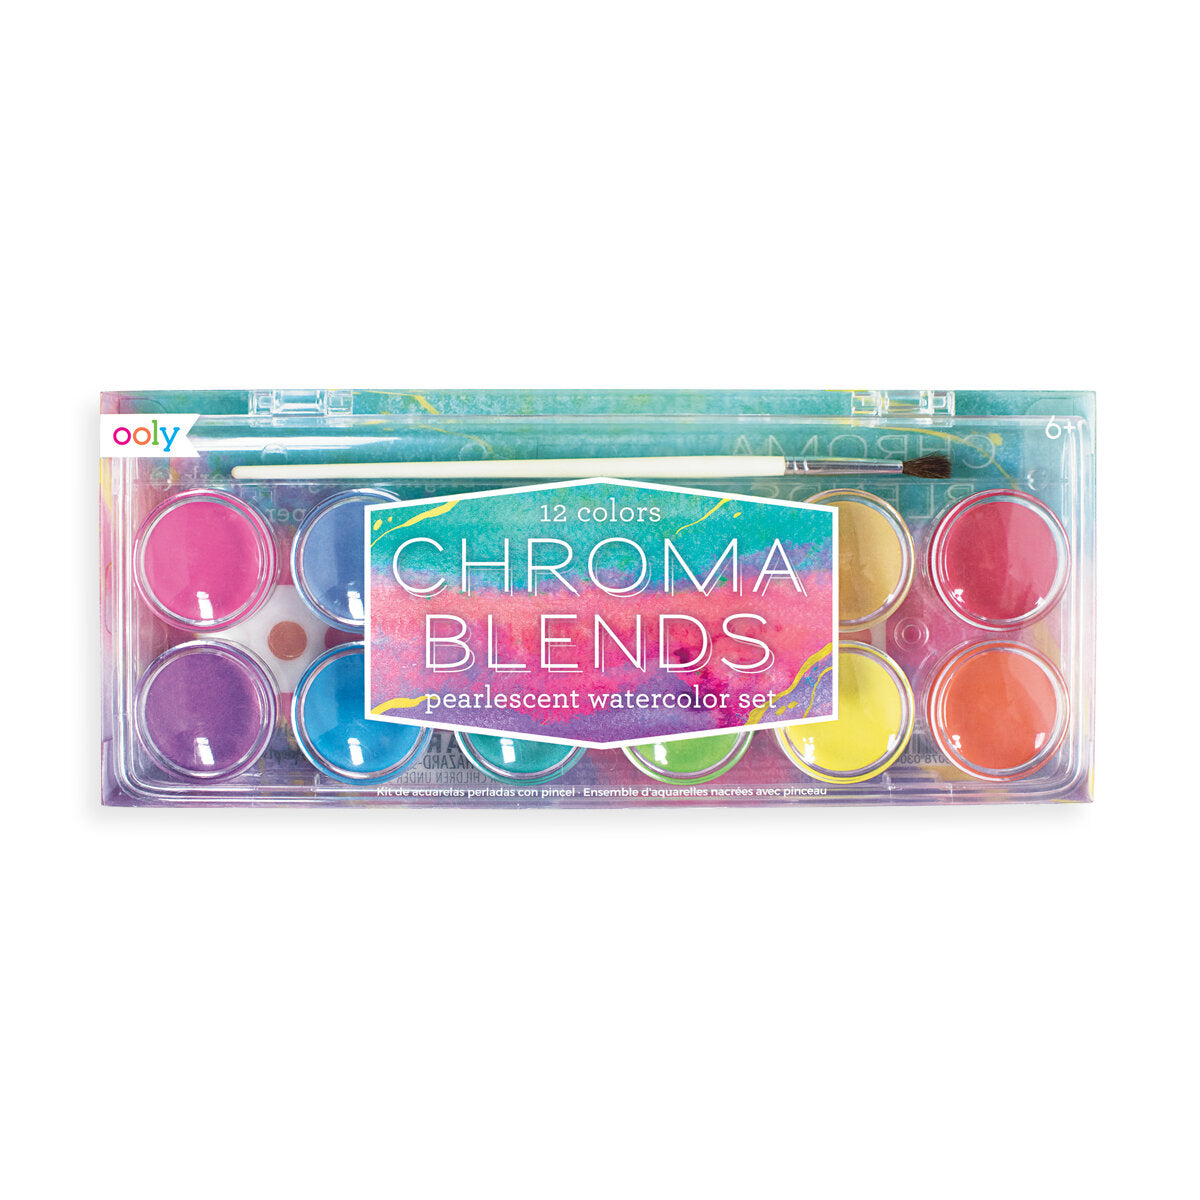 Ooly Chroma Blends Watercolour Paint (Pearlescent)